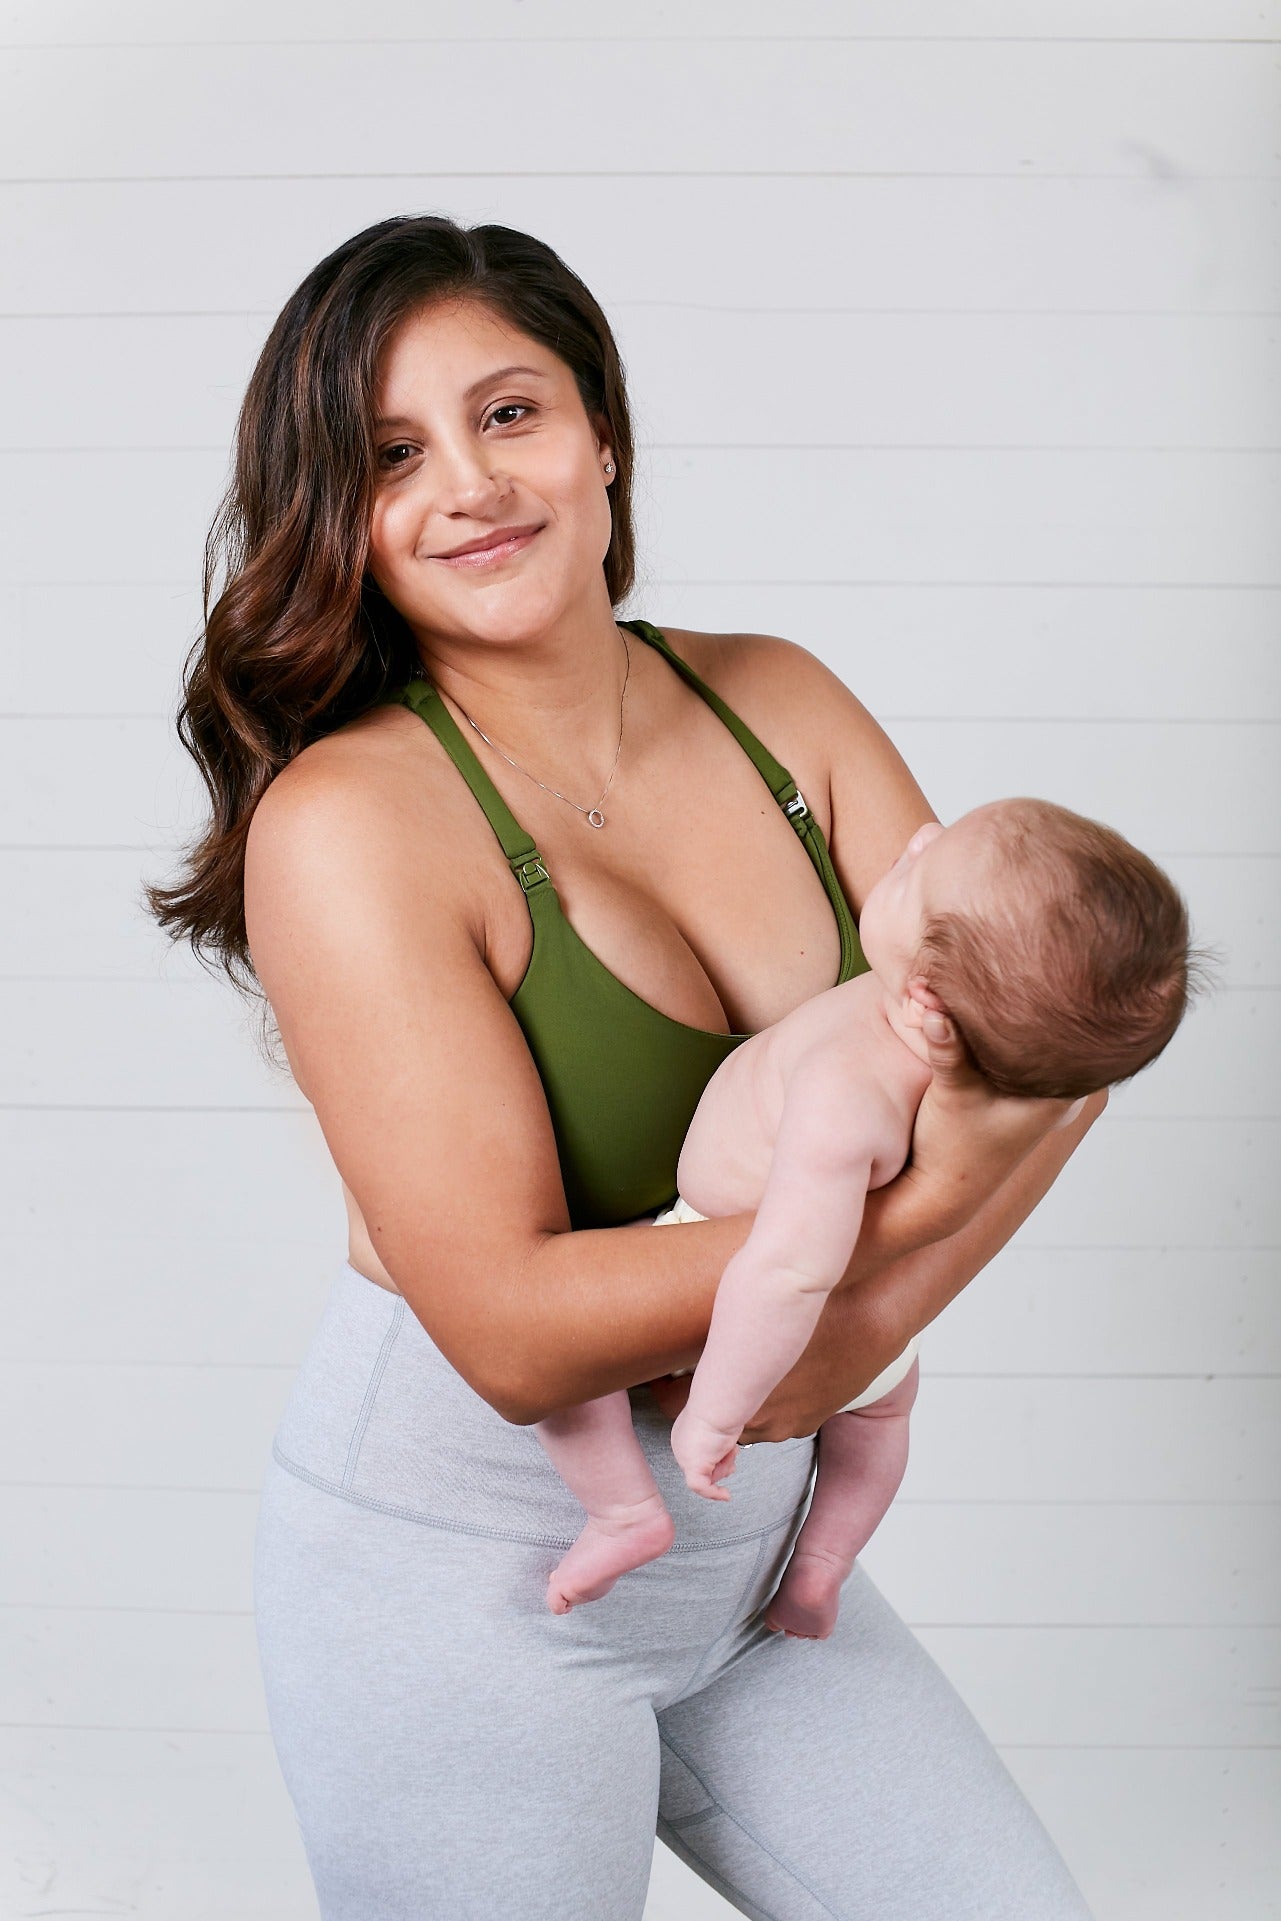 Maternity Nursing Best Yoga Bra With Support And Padded Cups For  Breastfeeding And Yoga Available In Sizes S XXL 230927 From Bong08, $32.56